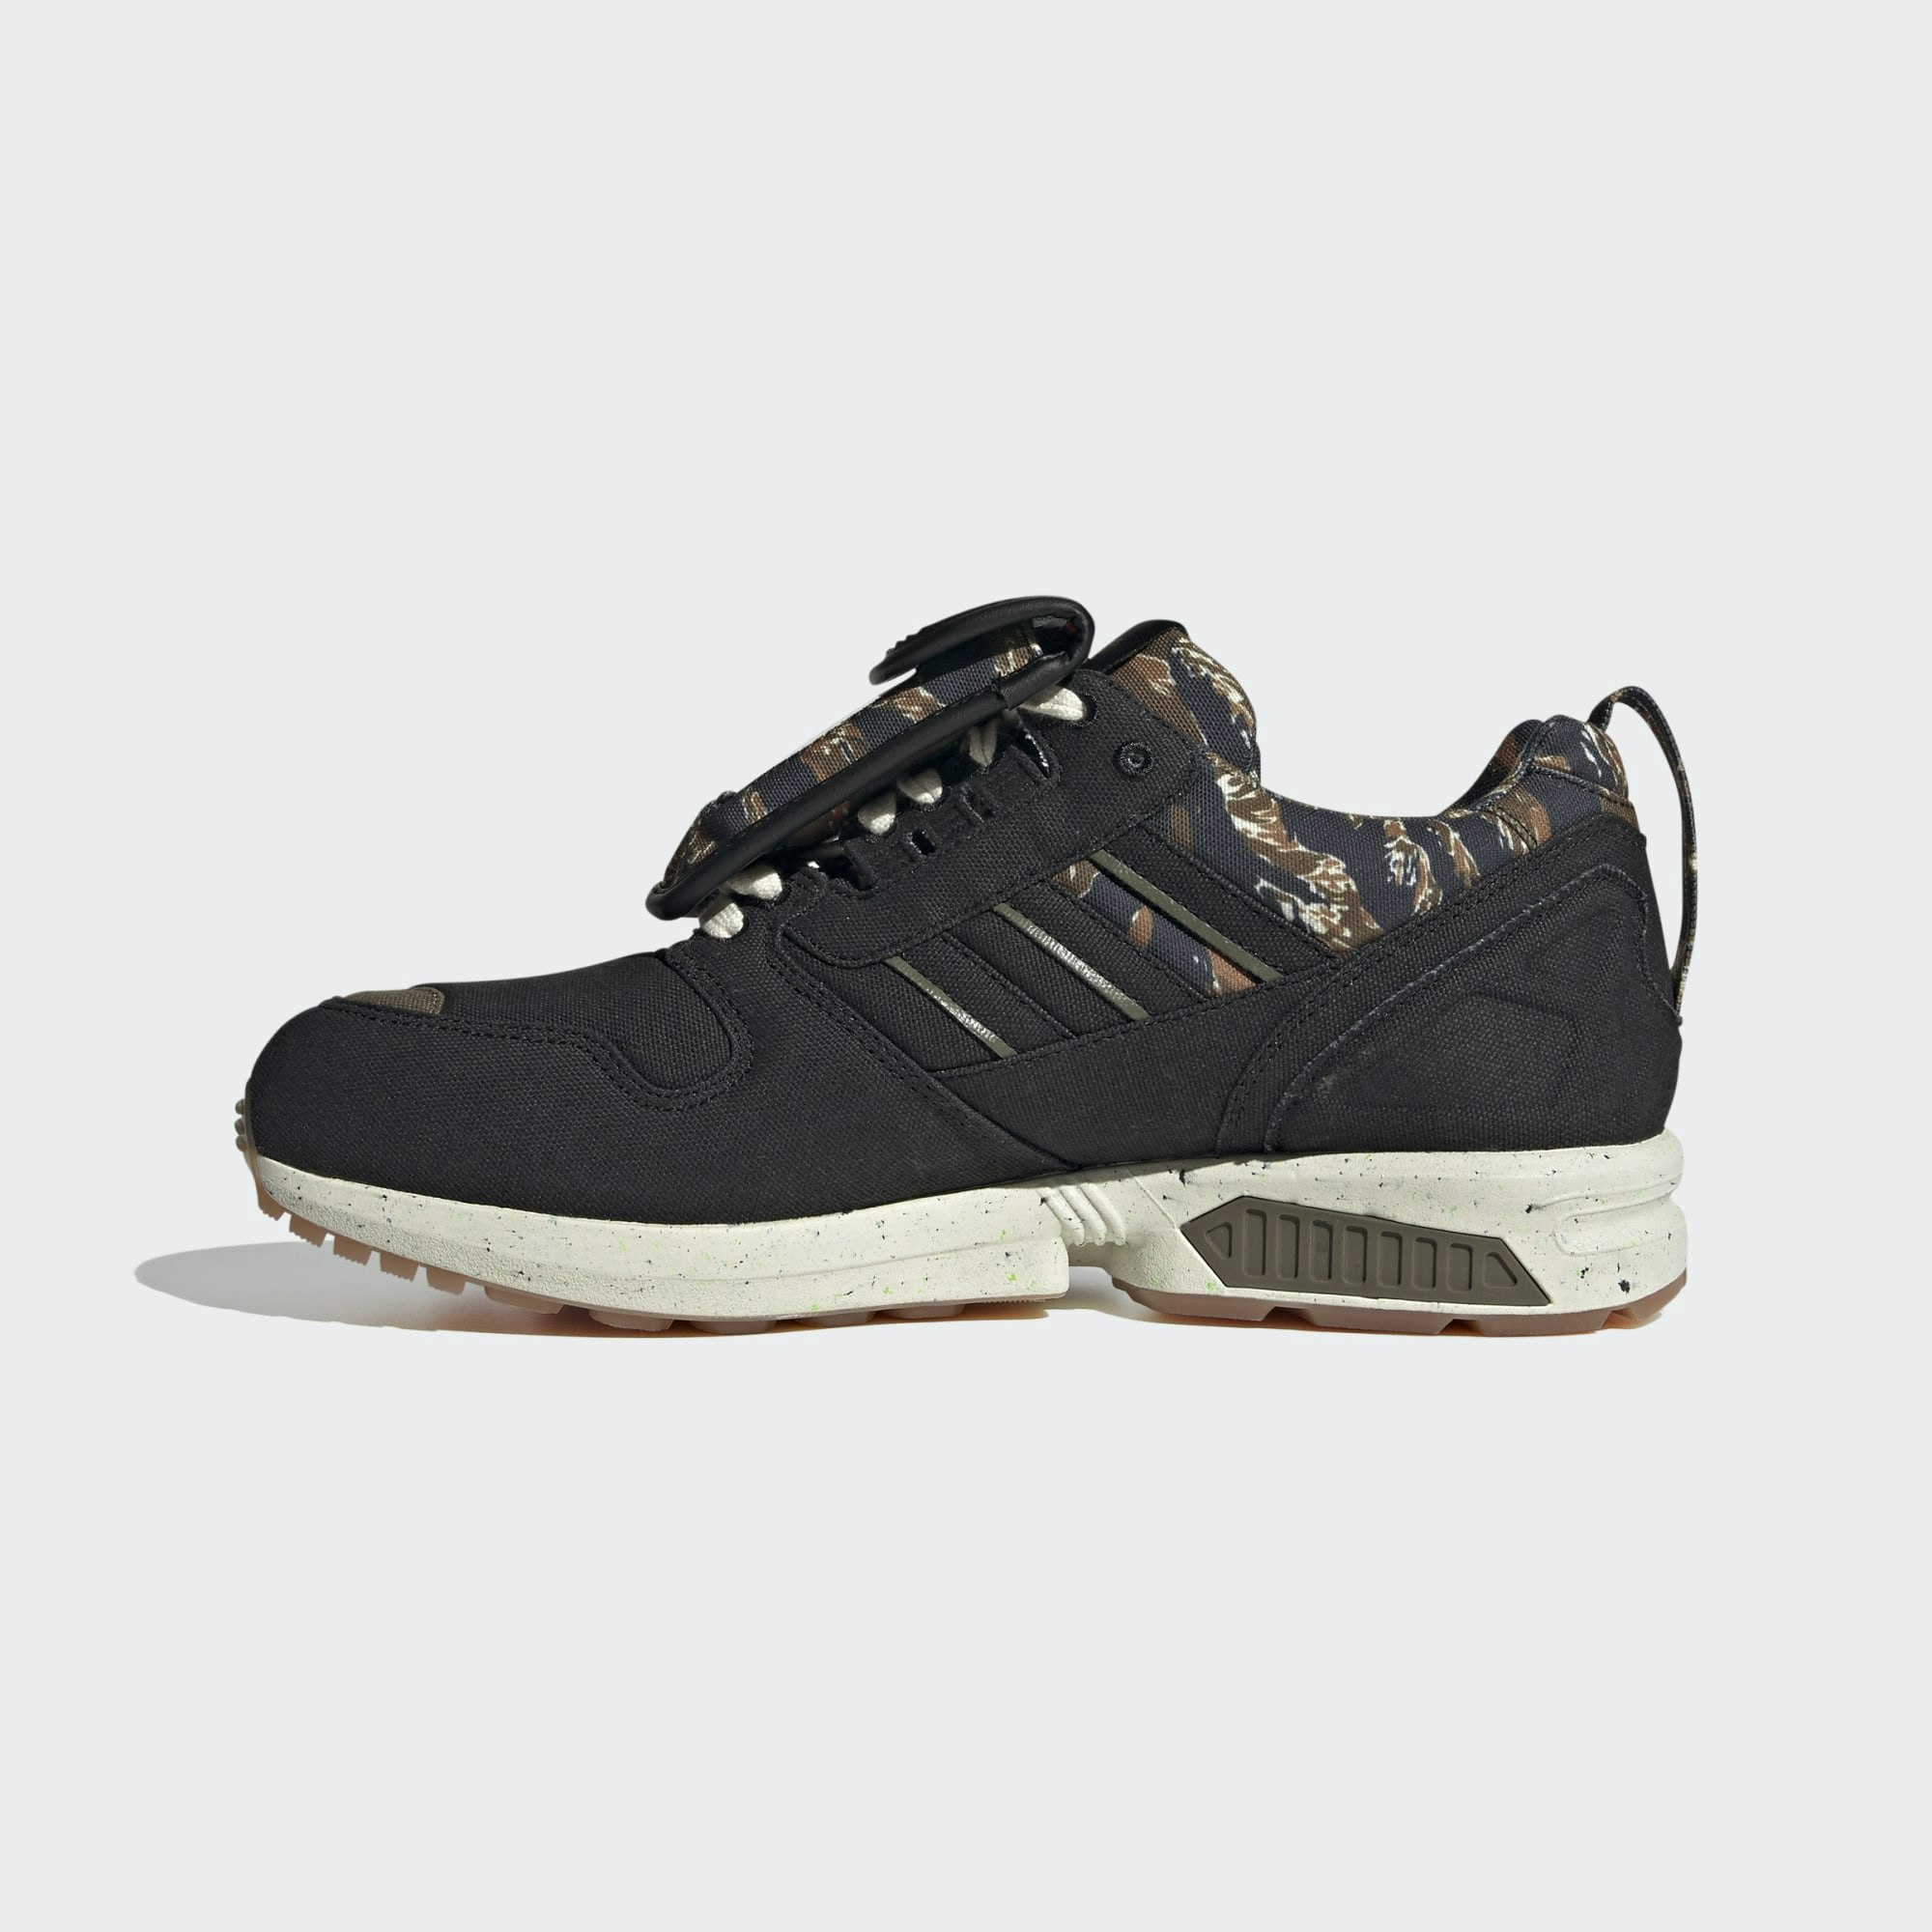 adidas ZX 8000 "Out There"